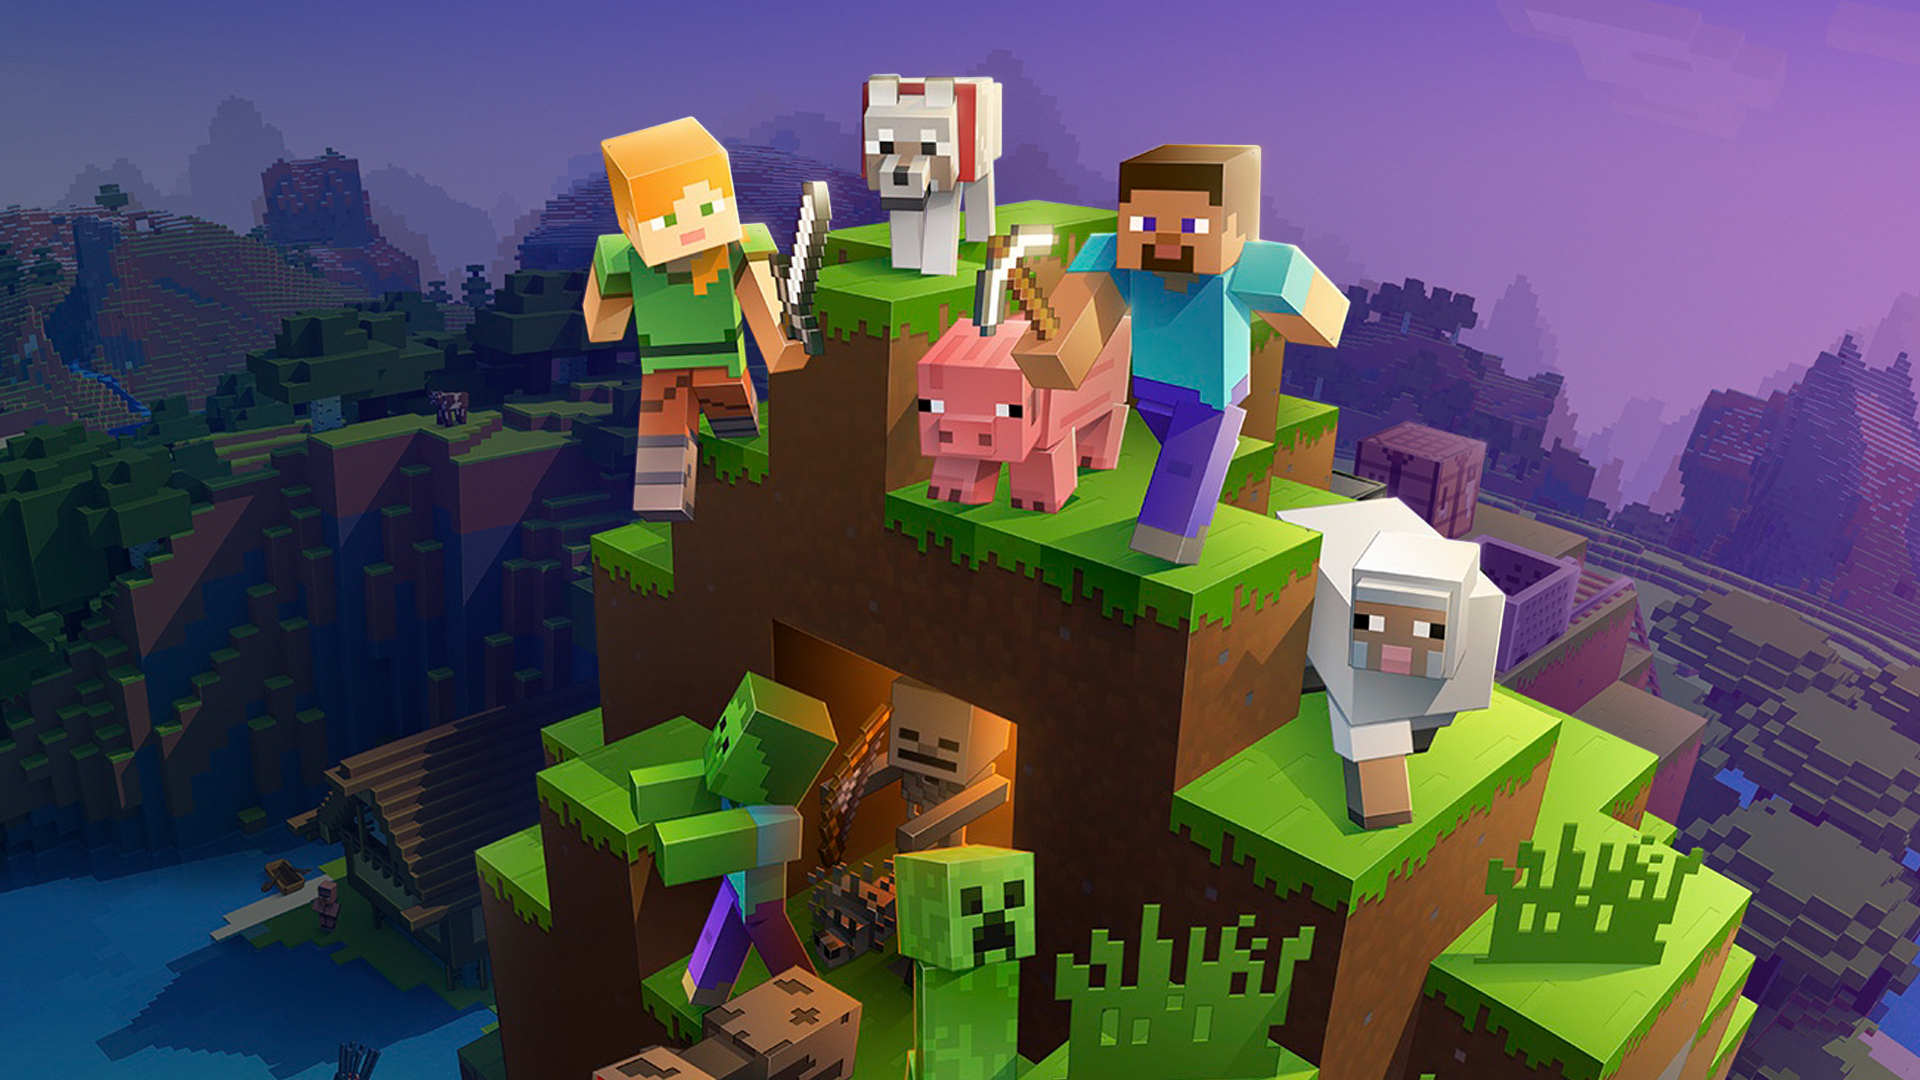 Minecraft characters pose on a hill